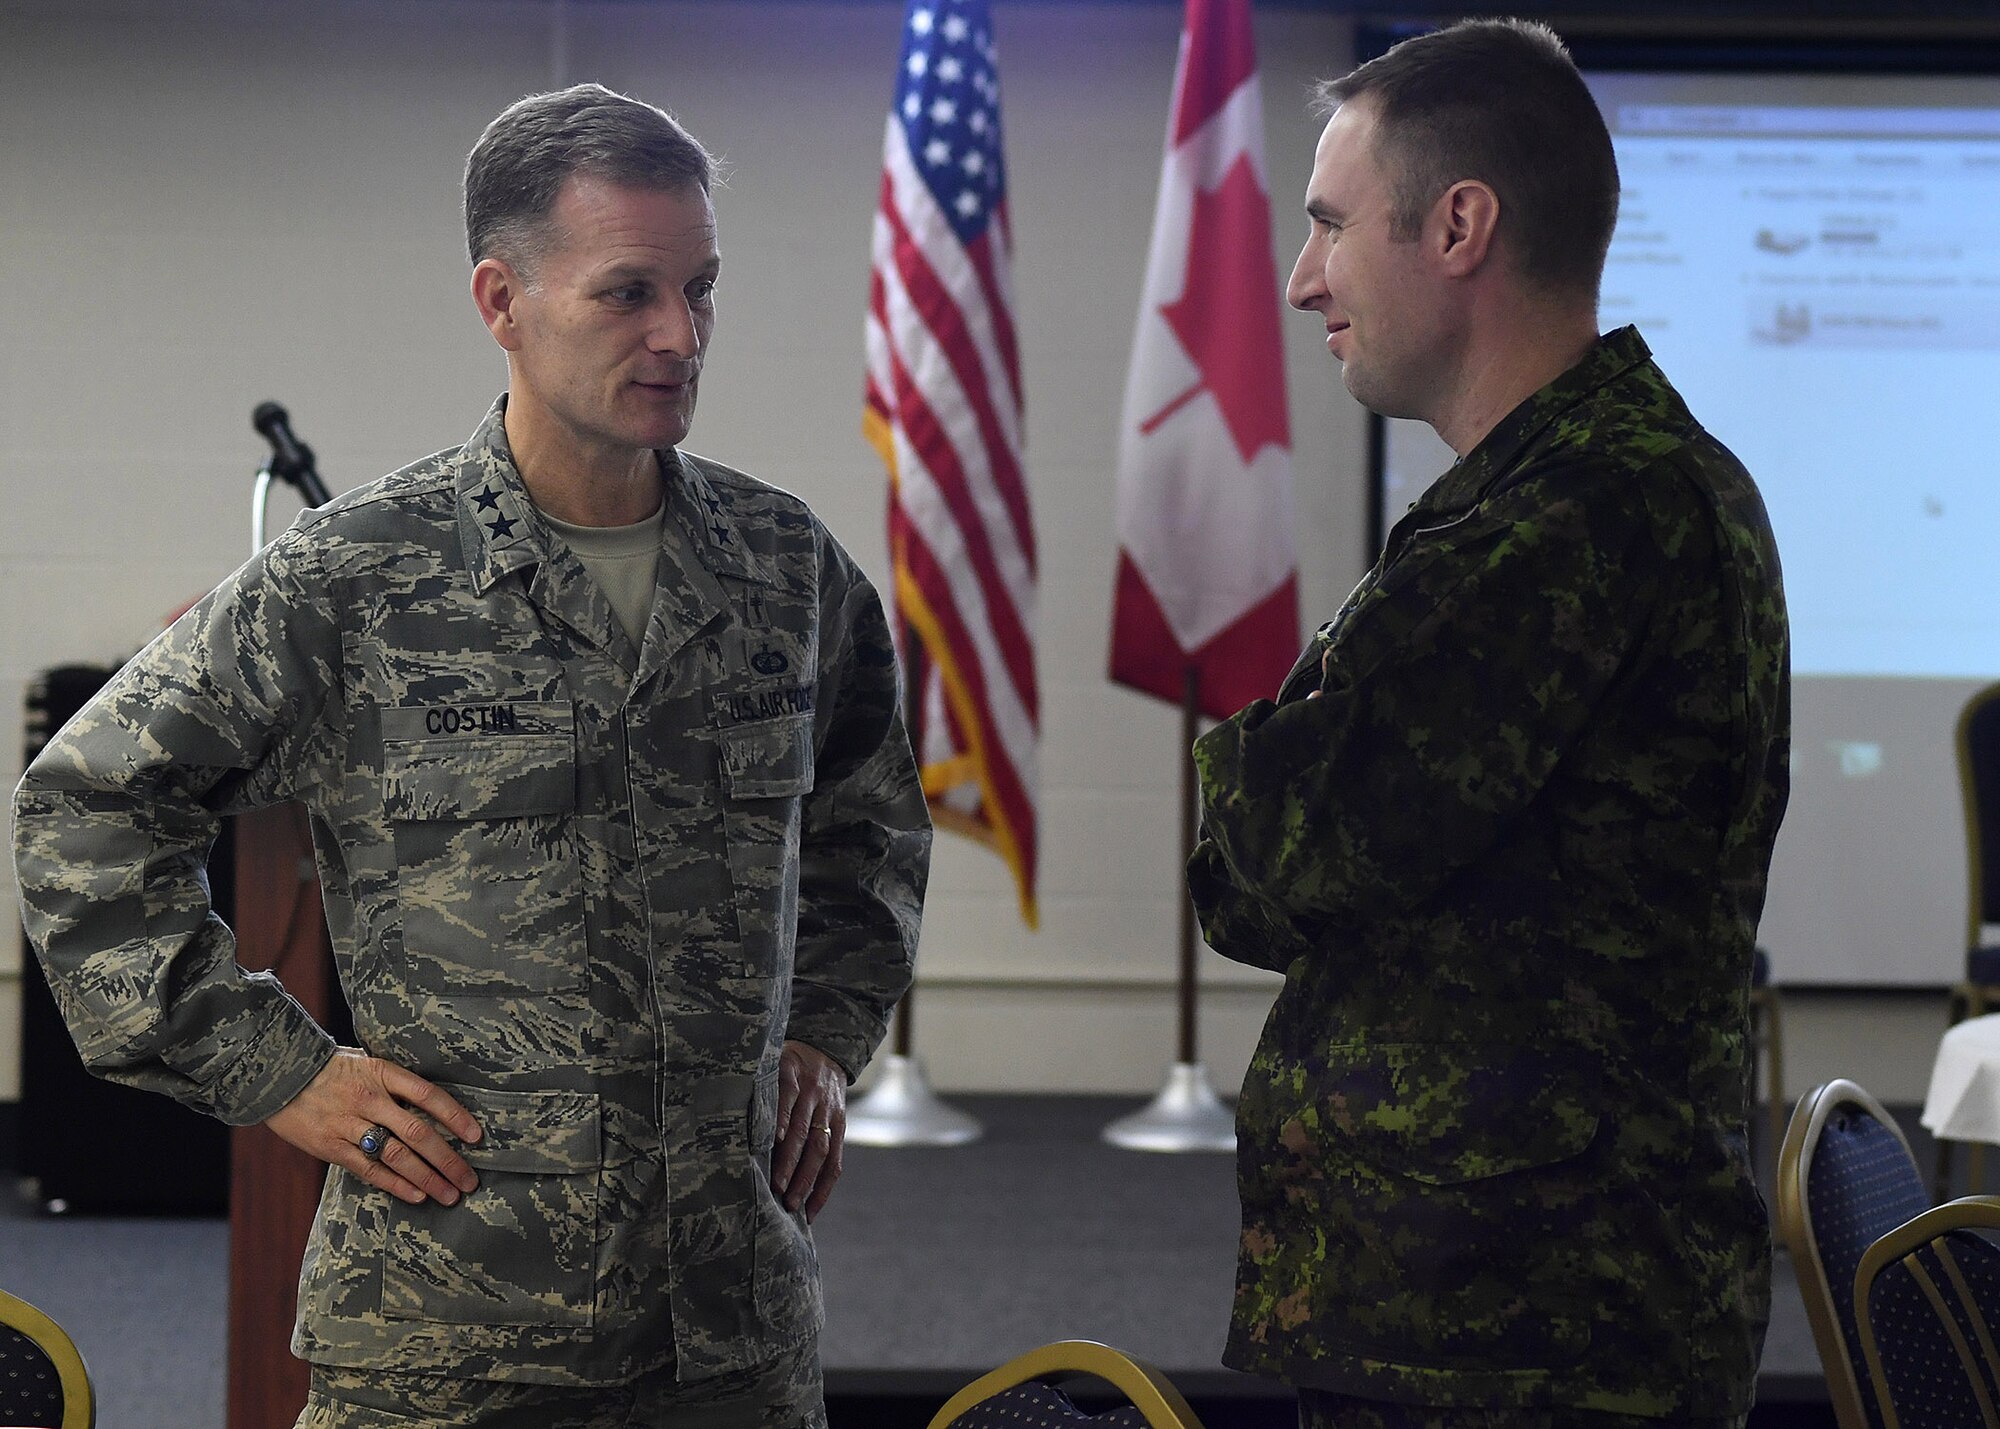 Maj. Gen. Dondi E. Costin, U.S Air Force Chief of Chaplains, left, speaks with Canadian armed forces member Capt. Jeff Reinink, 10th Space Warning Squadron crew commander, Feb. 16, 2017, on Cavalier Air Force Station, North Dakota. Costin became the first Air Force Chief of Chaplains to visit Cavalier AFS. (U.S. Air Force photo by Senior Airman Ryan Sparks)